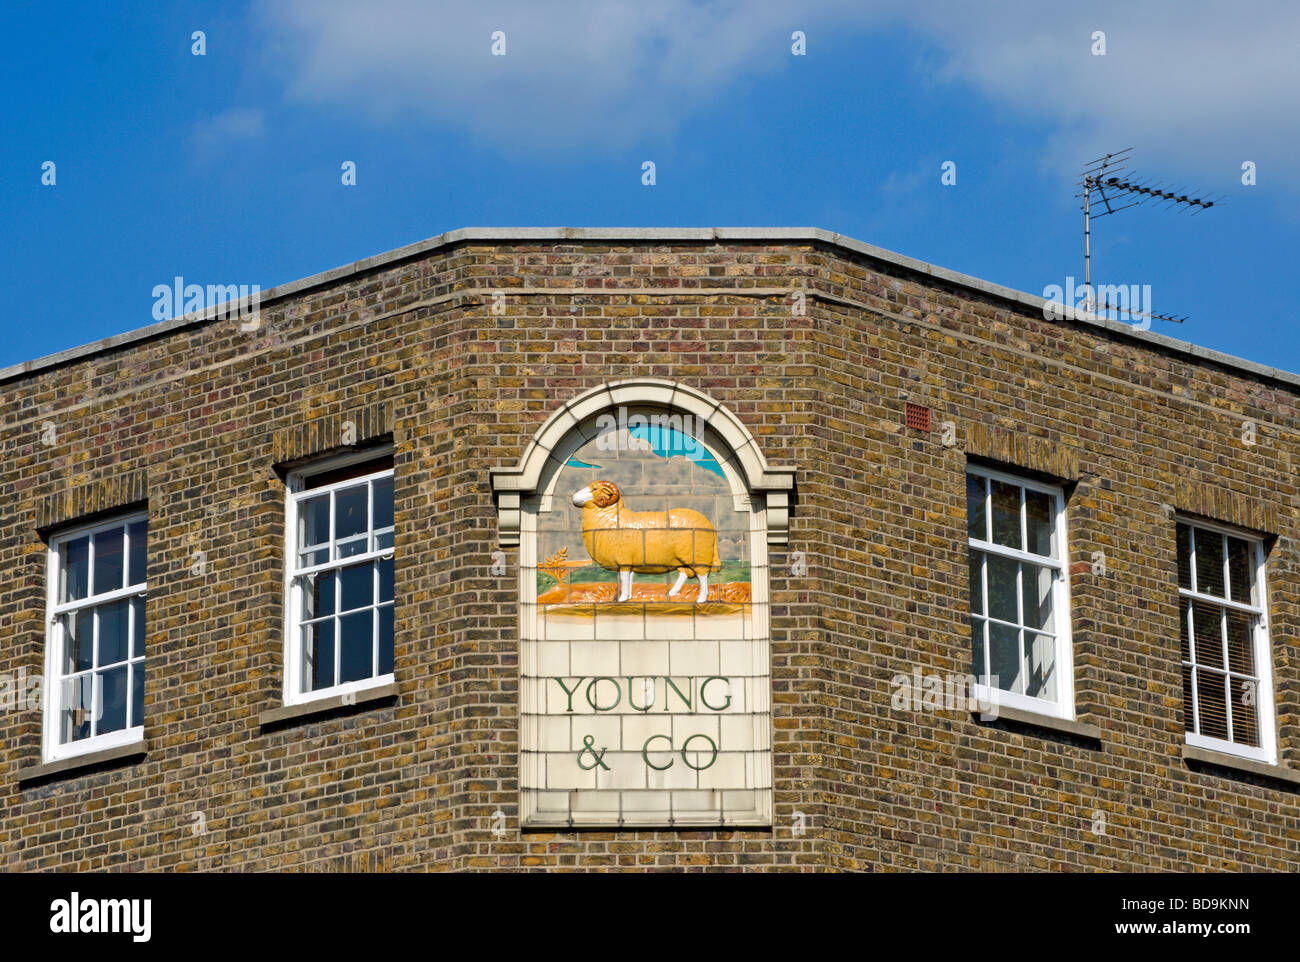 image of a ram, symbol of young & co brewery, at the crown and anchor pub on chiswck high road, chiswck, west london, england Stock Photo